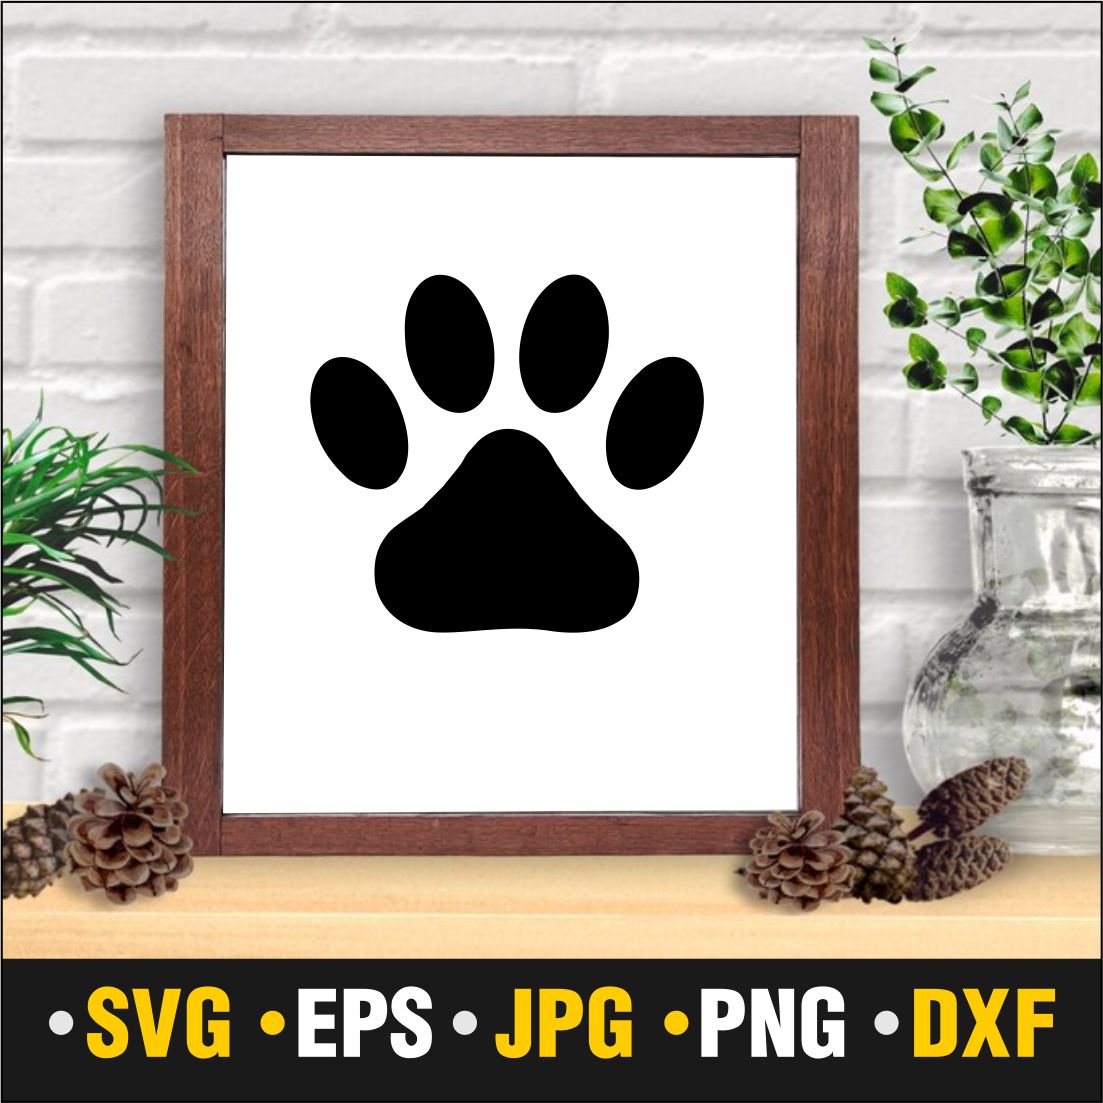 Picture of a dog's paw in a frame.